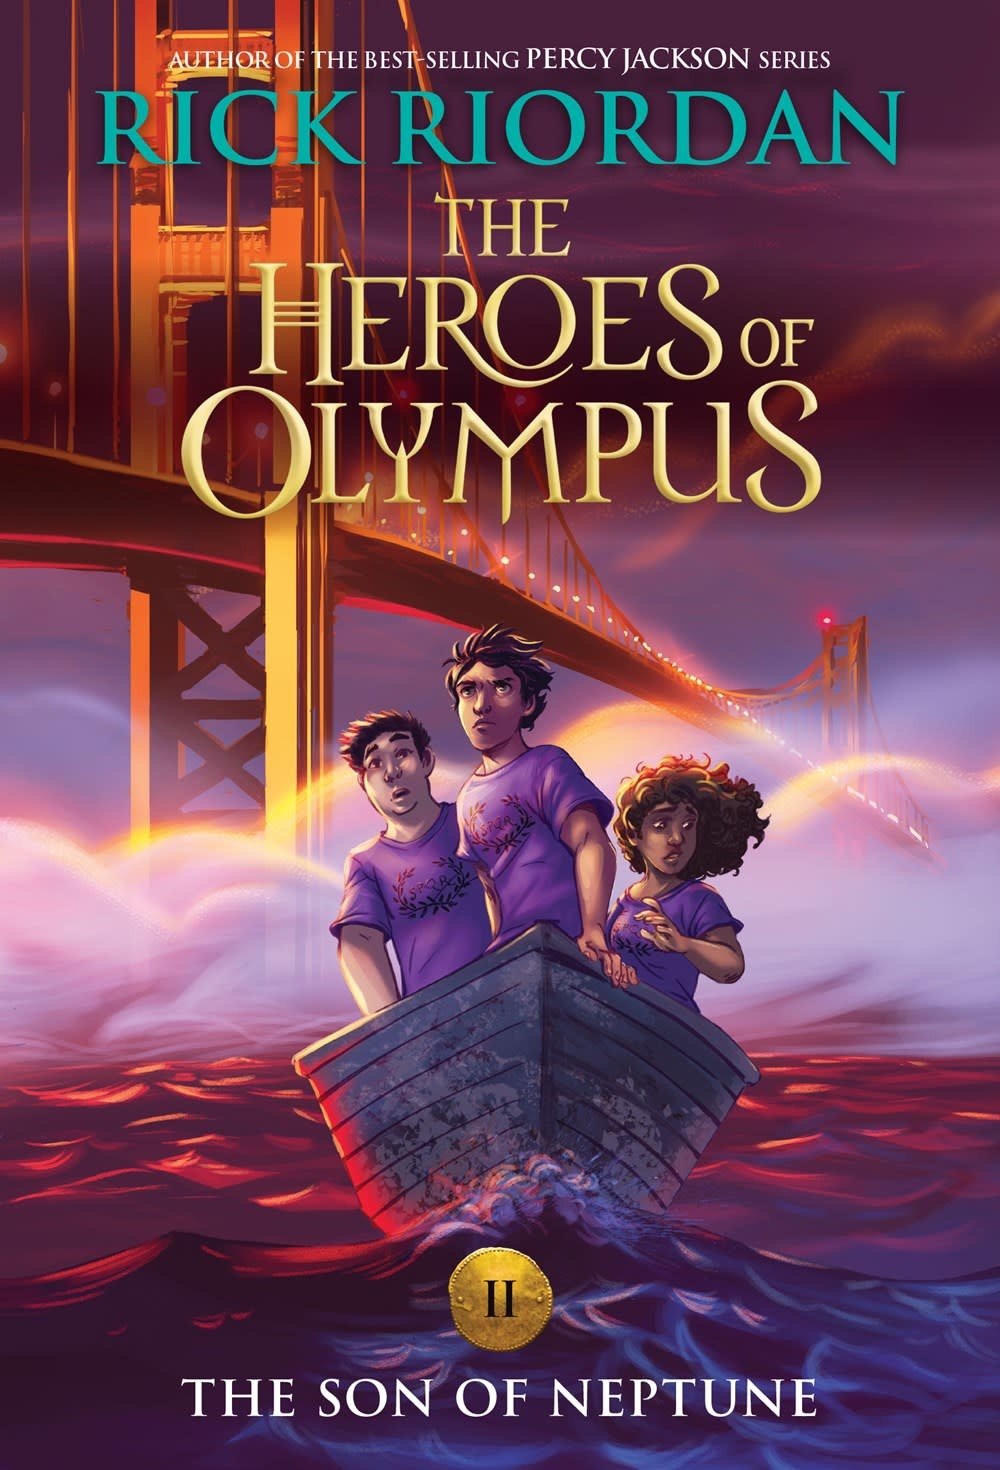 Disney-Hyperion Heroes of Olympus 02 The Son of Neptune (Percy Jackson)